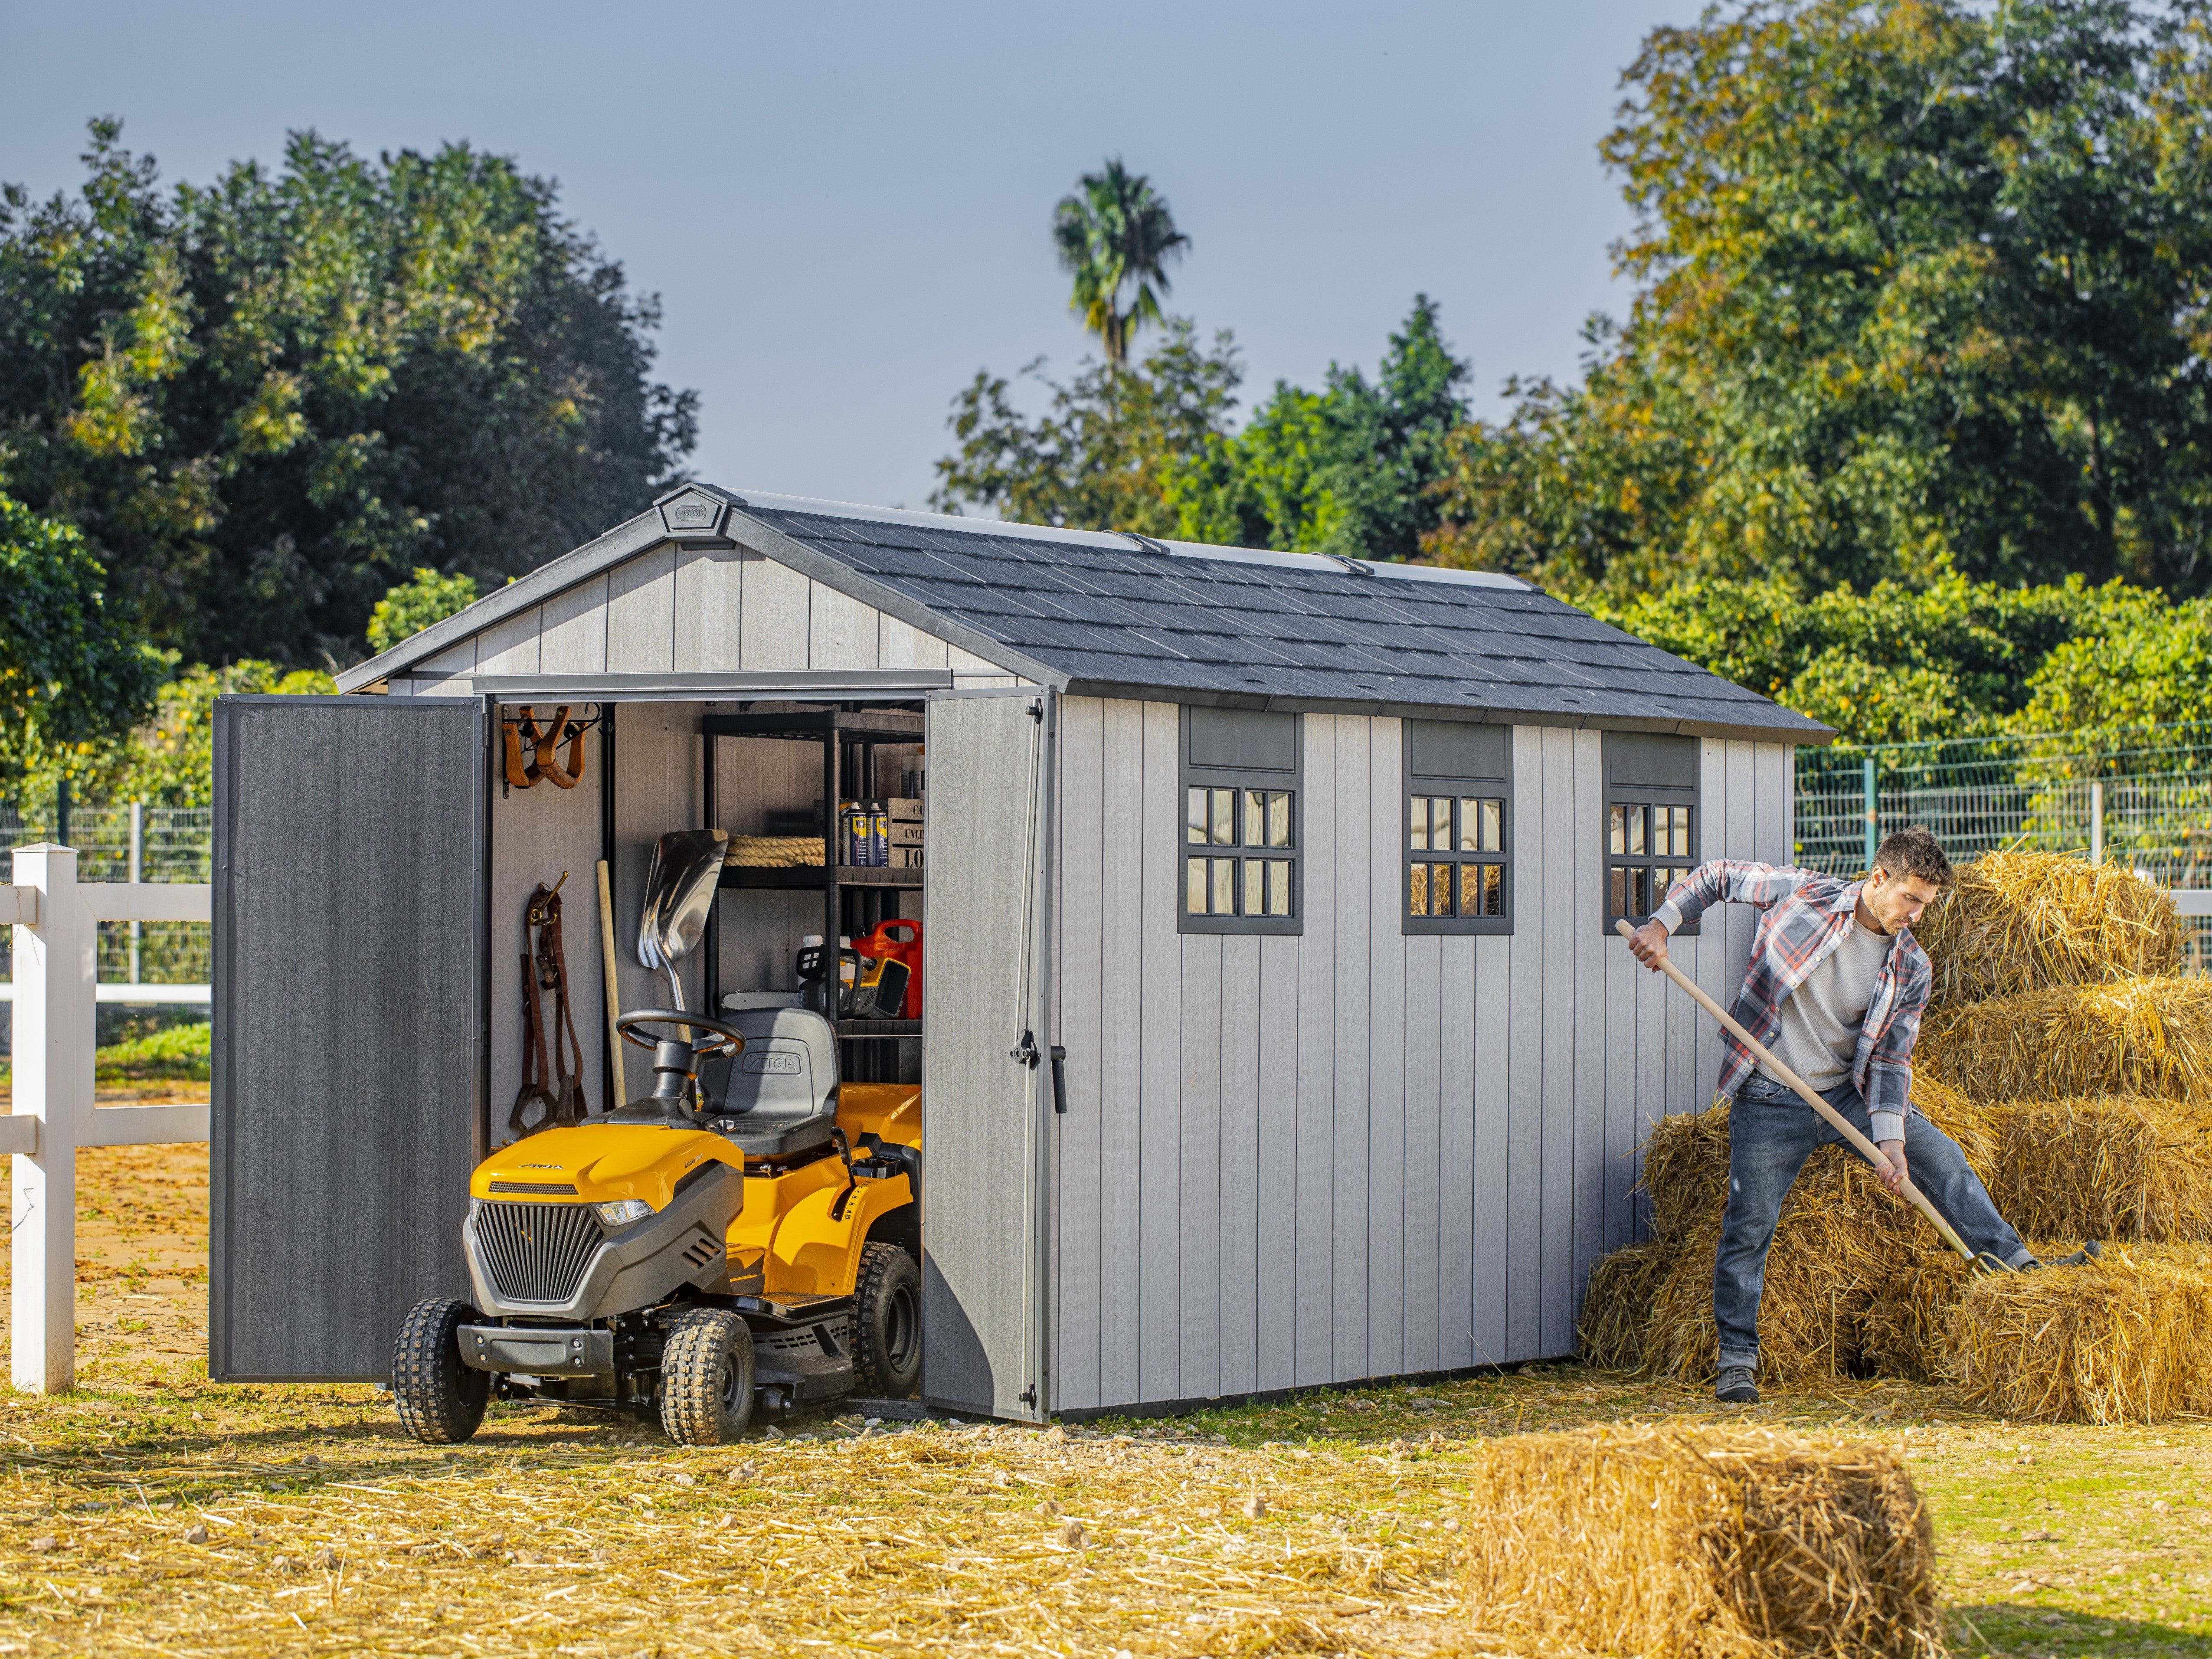 Keter Oakland 7515 shed on sunny day with haybales and ride on mower